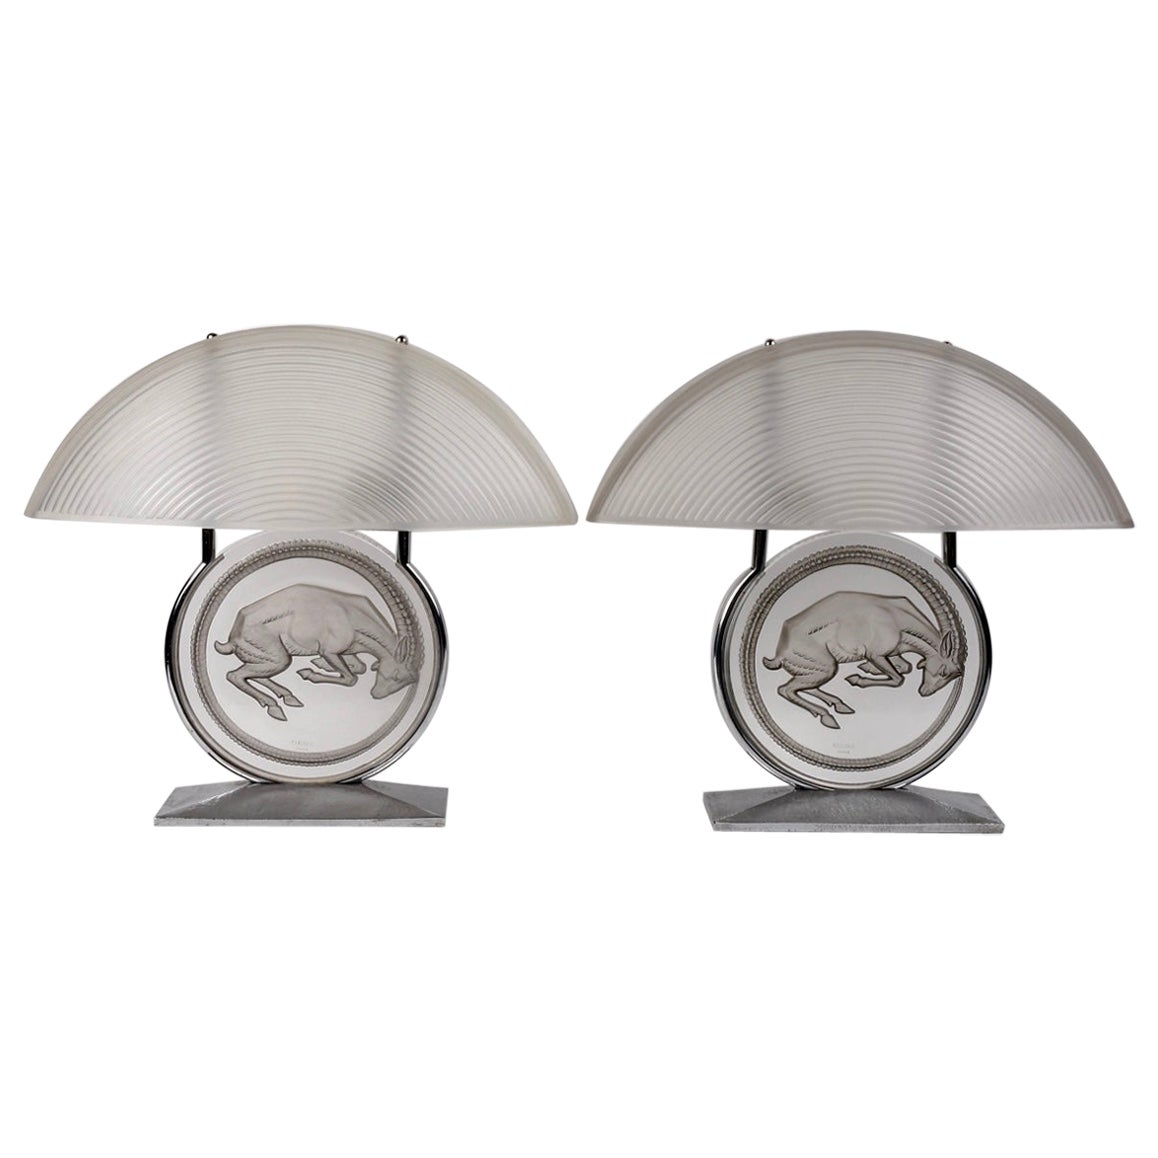 1931 René Lalique Pair Lamps Belier Rams Glass with Grey Patina For Sale